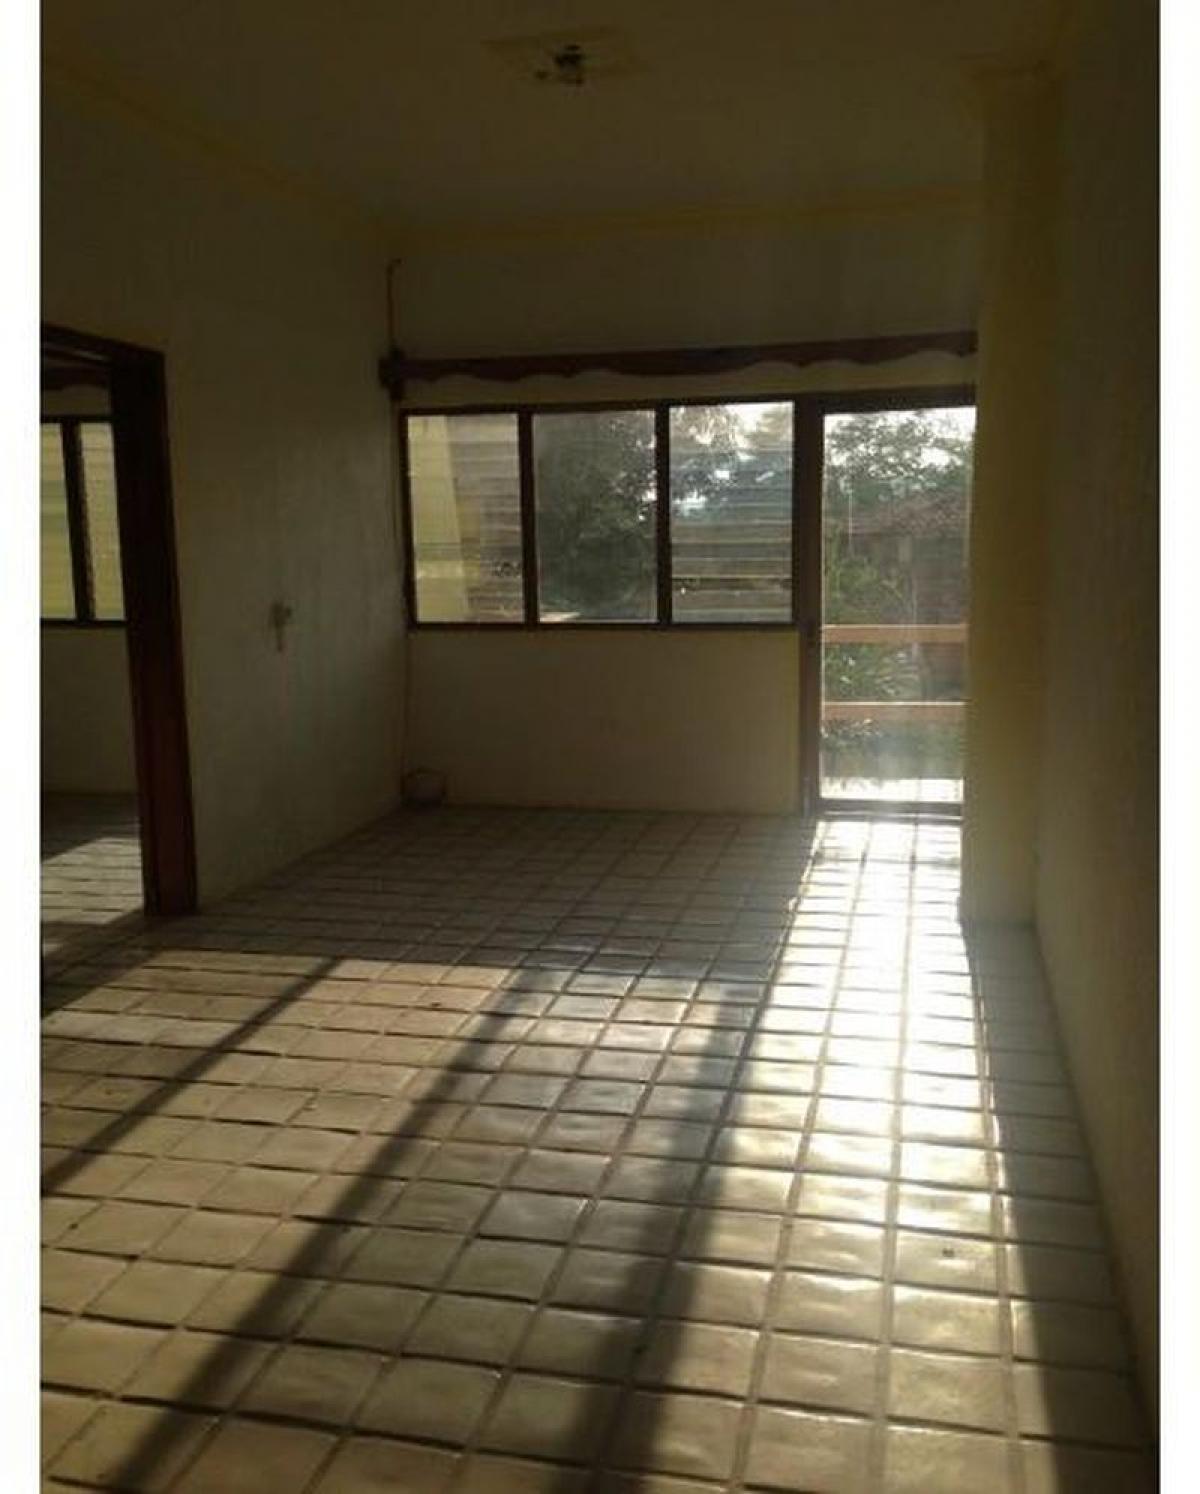 Picture of Apartment For Sale in Cihuatlan, Jalisco, Mexico